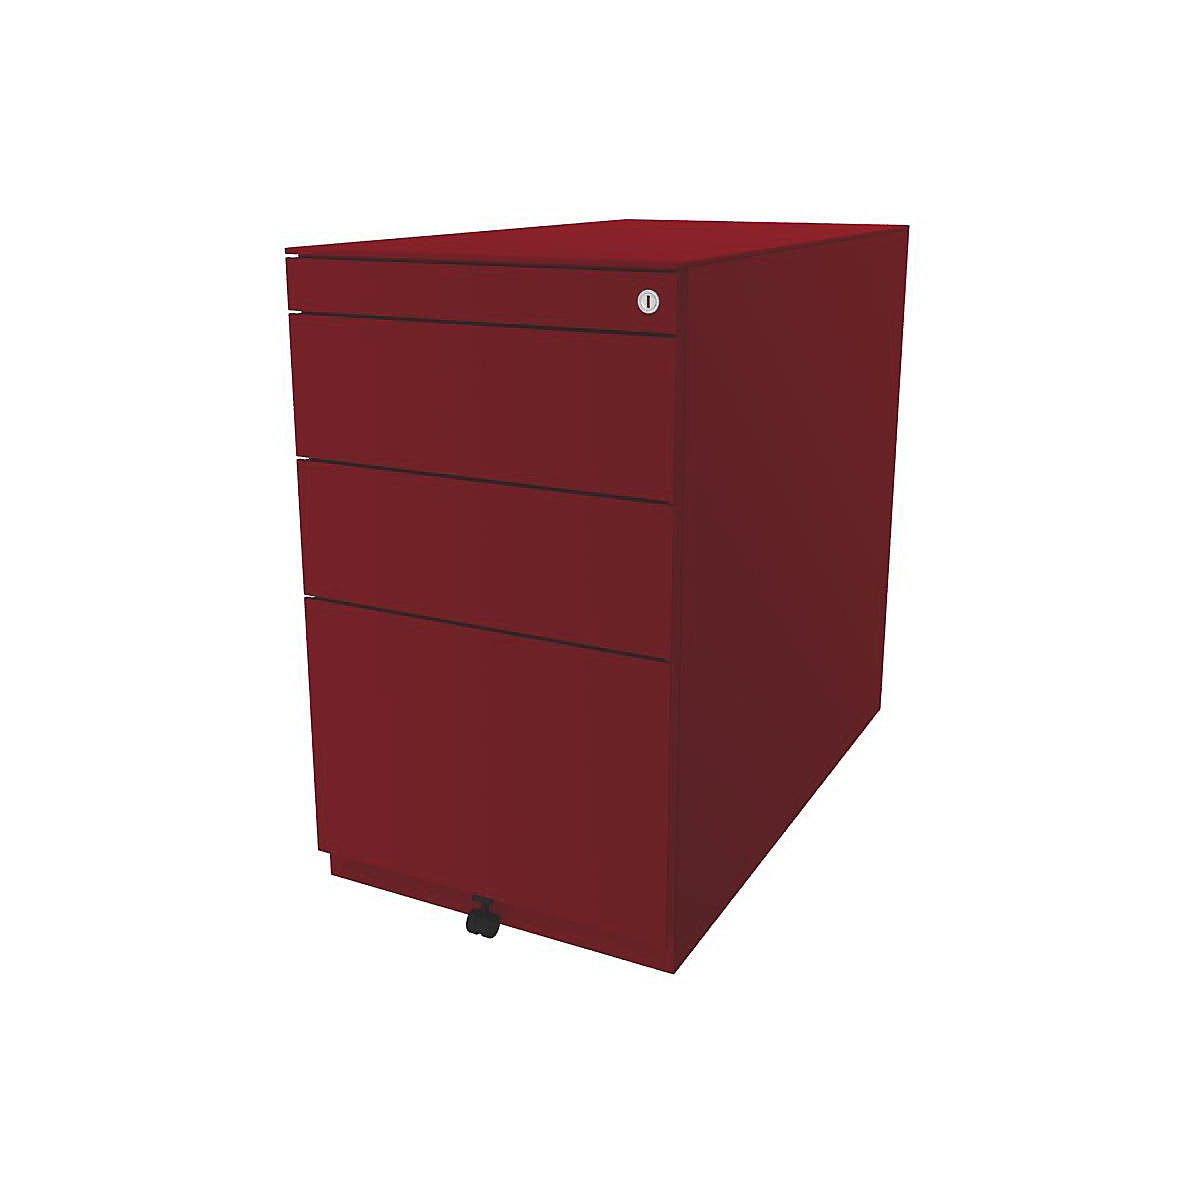 Note™ fixed pedestal, with 2 universal drawers, 1 suspension file drawer – BISLEY, with top, depth 775 mm, cardinal red-13